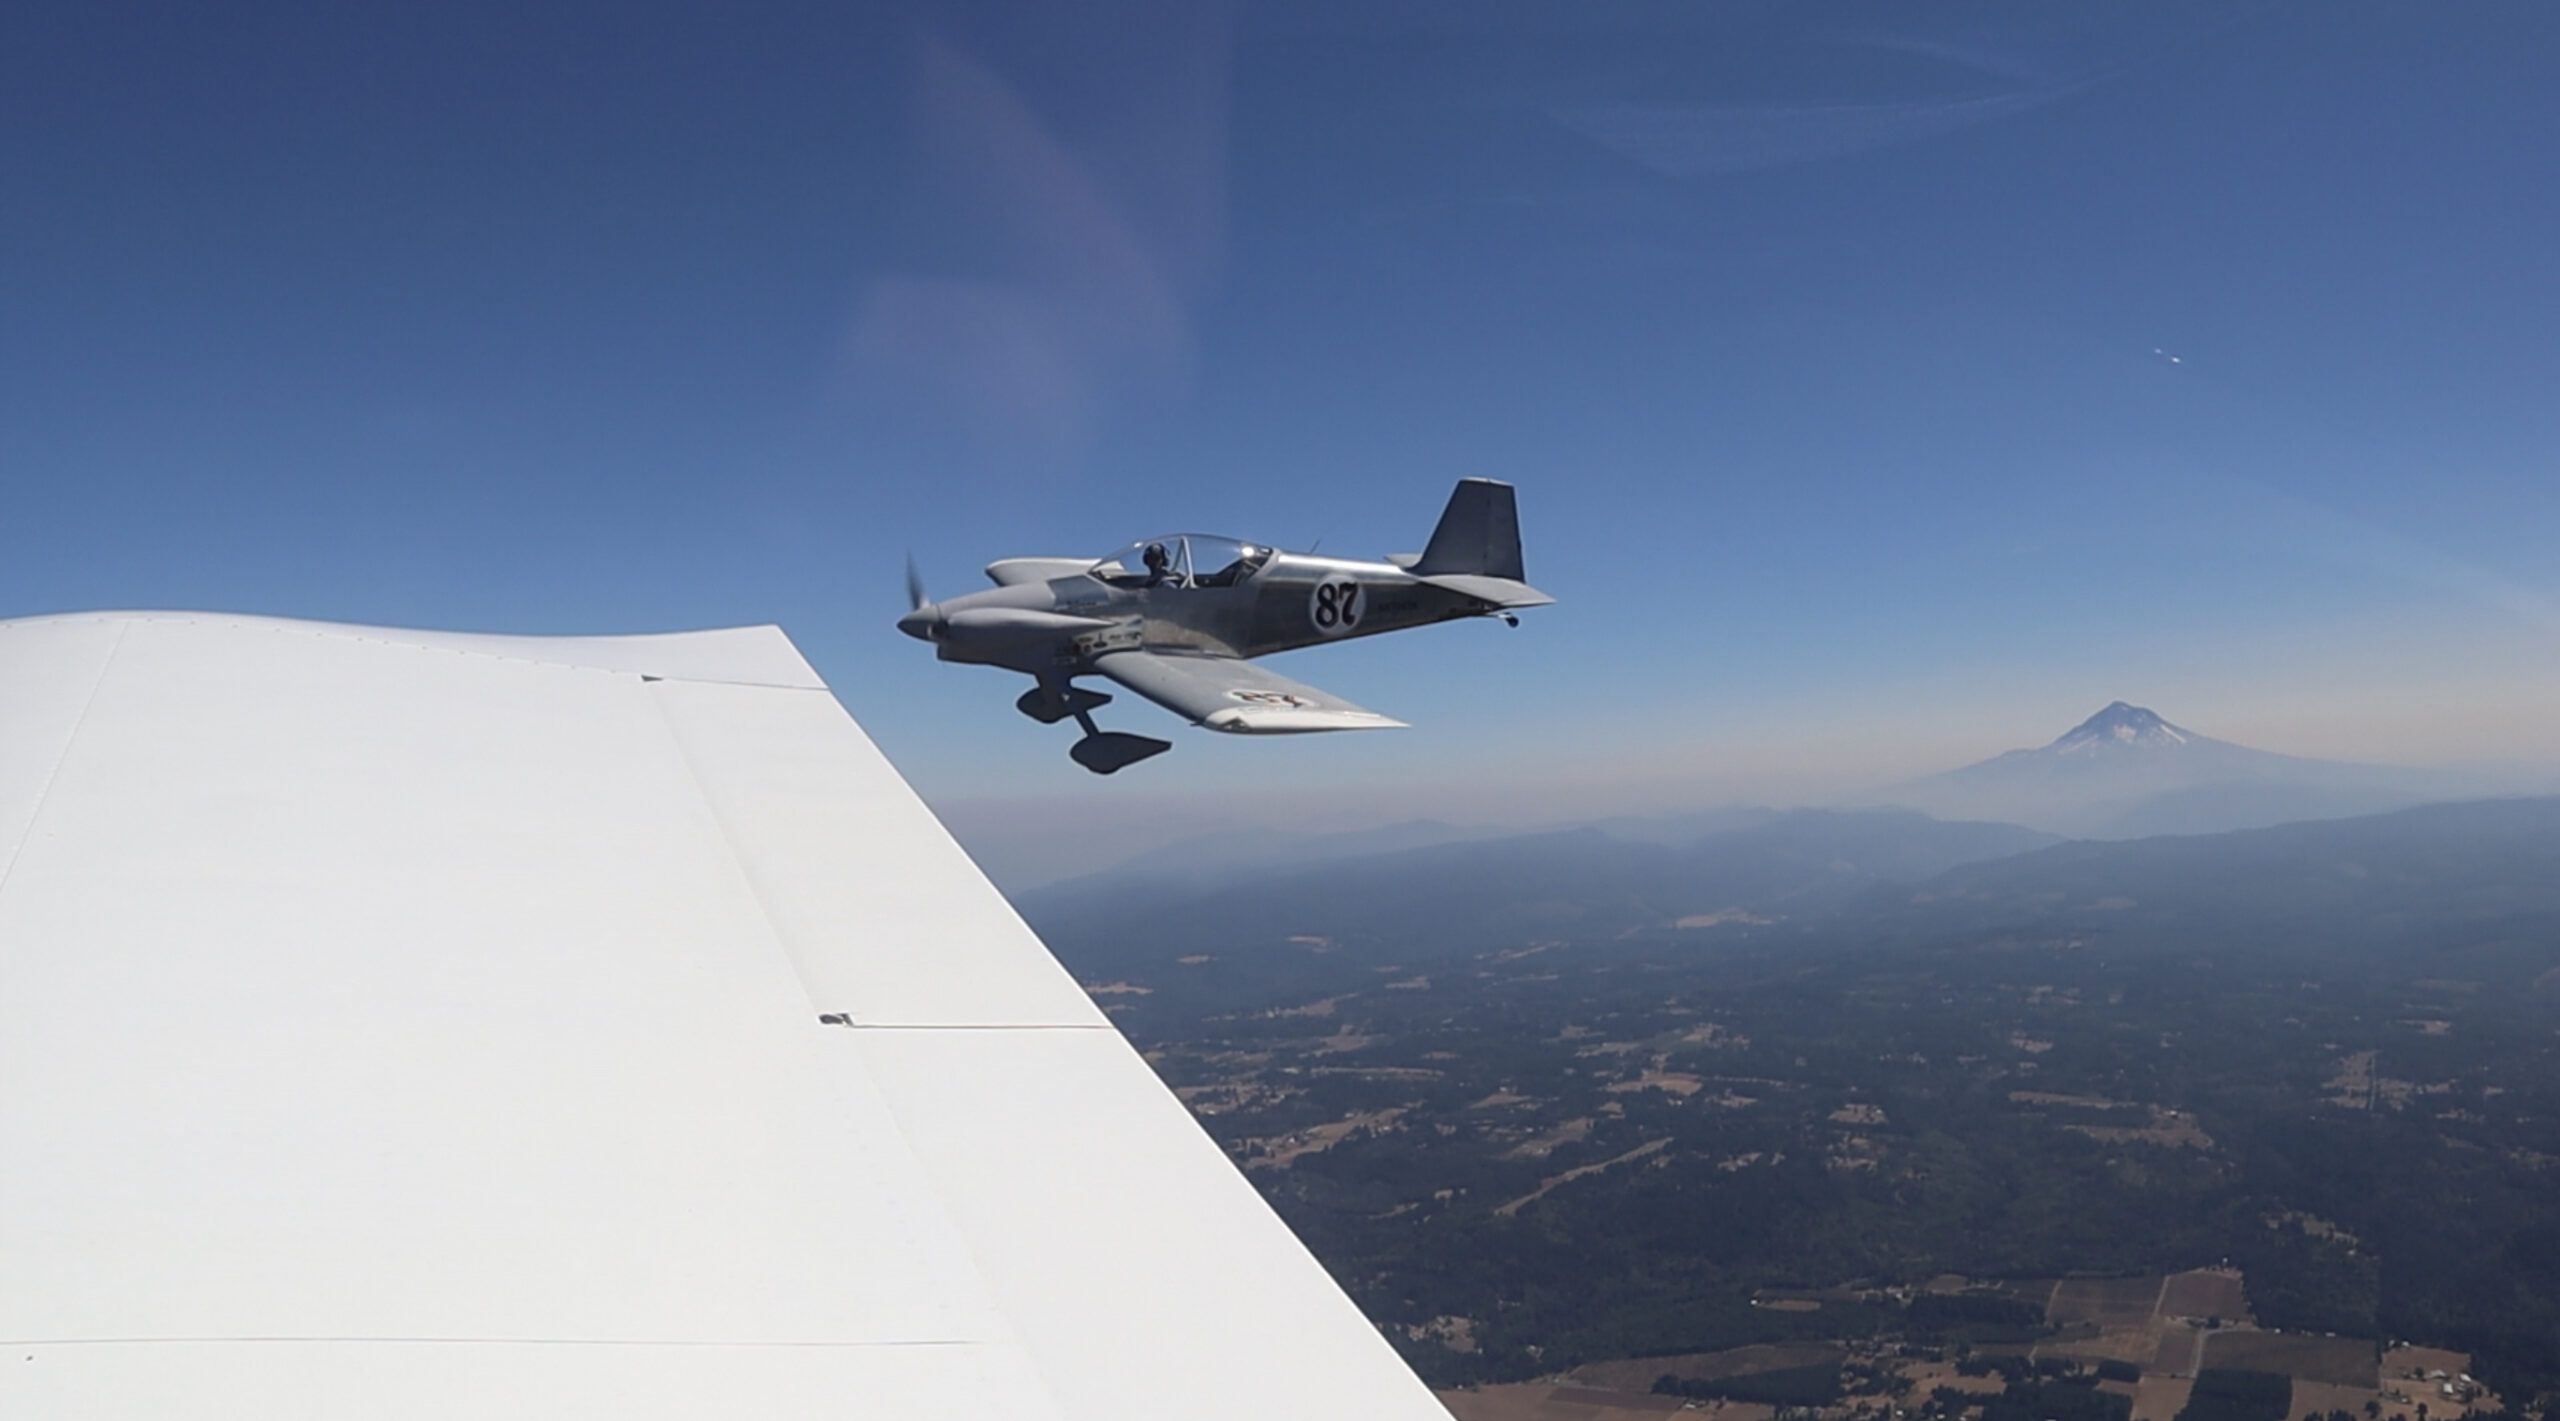 Van’s Test Pilot Axel Alvarez got to take a break from flying the RV-15 and fly his RV-4